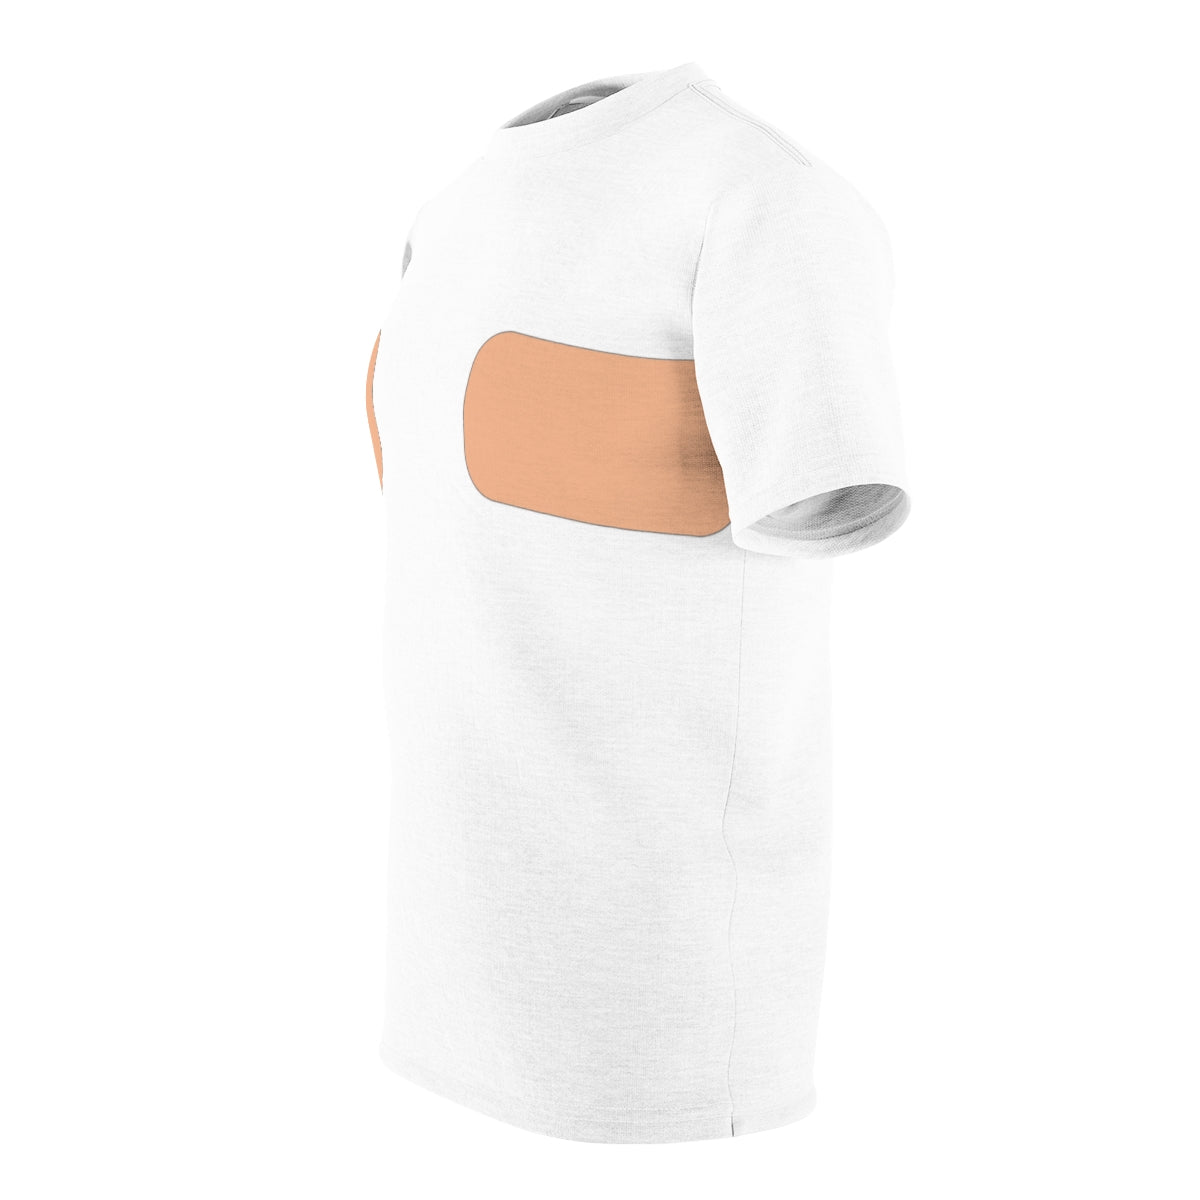 Normalize Chest Taping Tee | Skin Tone 002 - 1 Strip